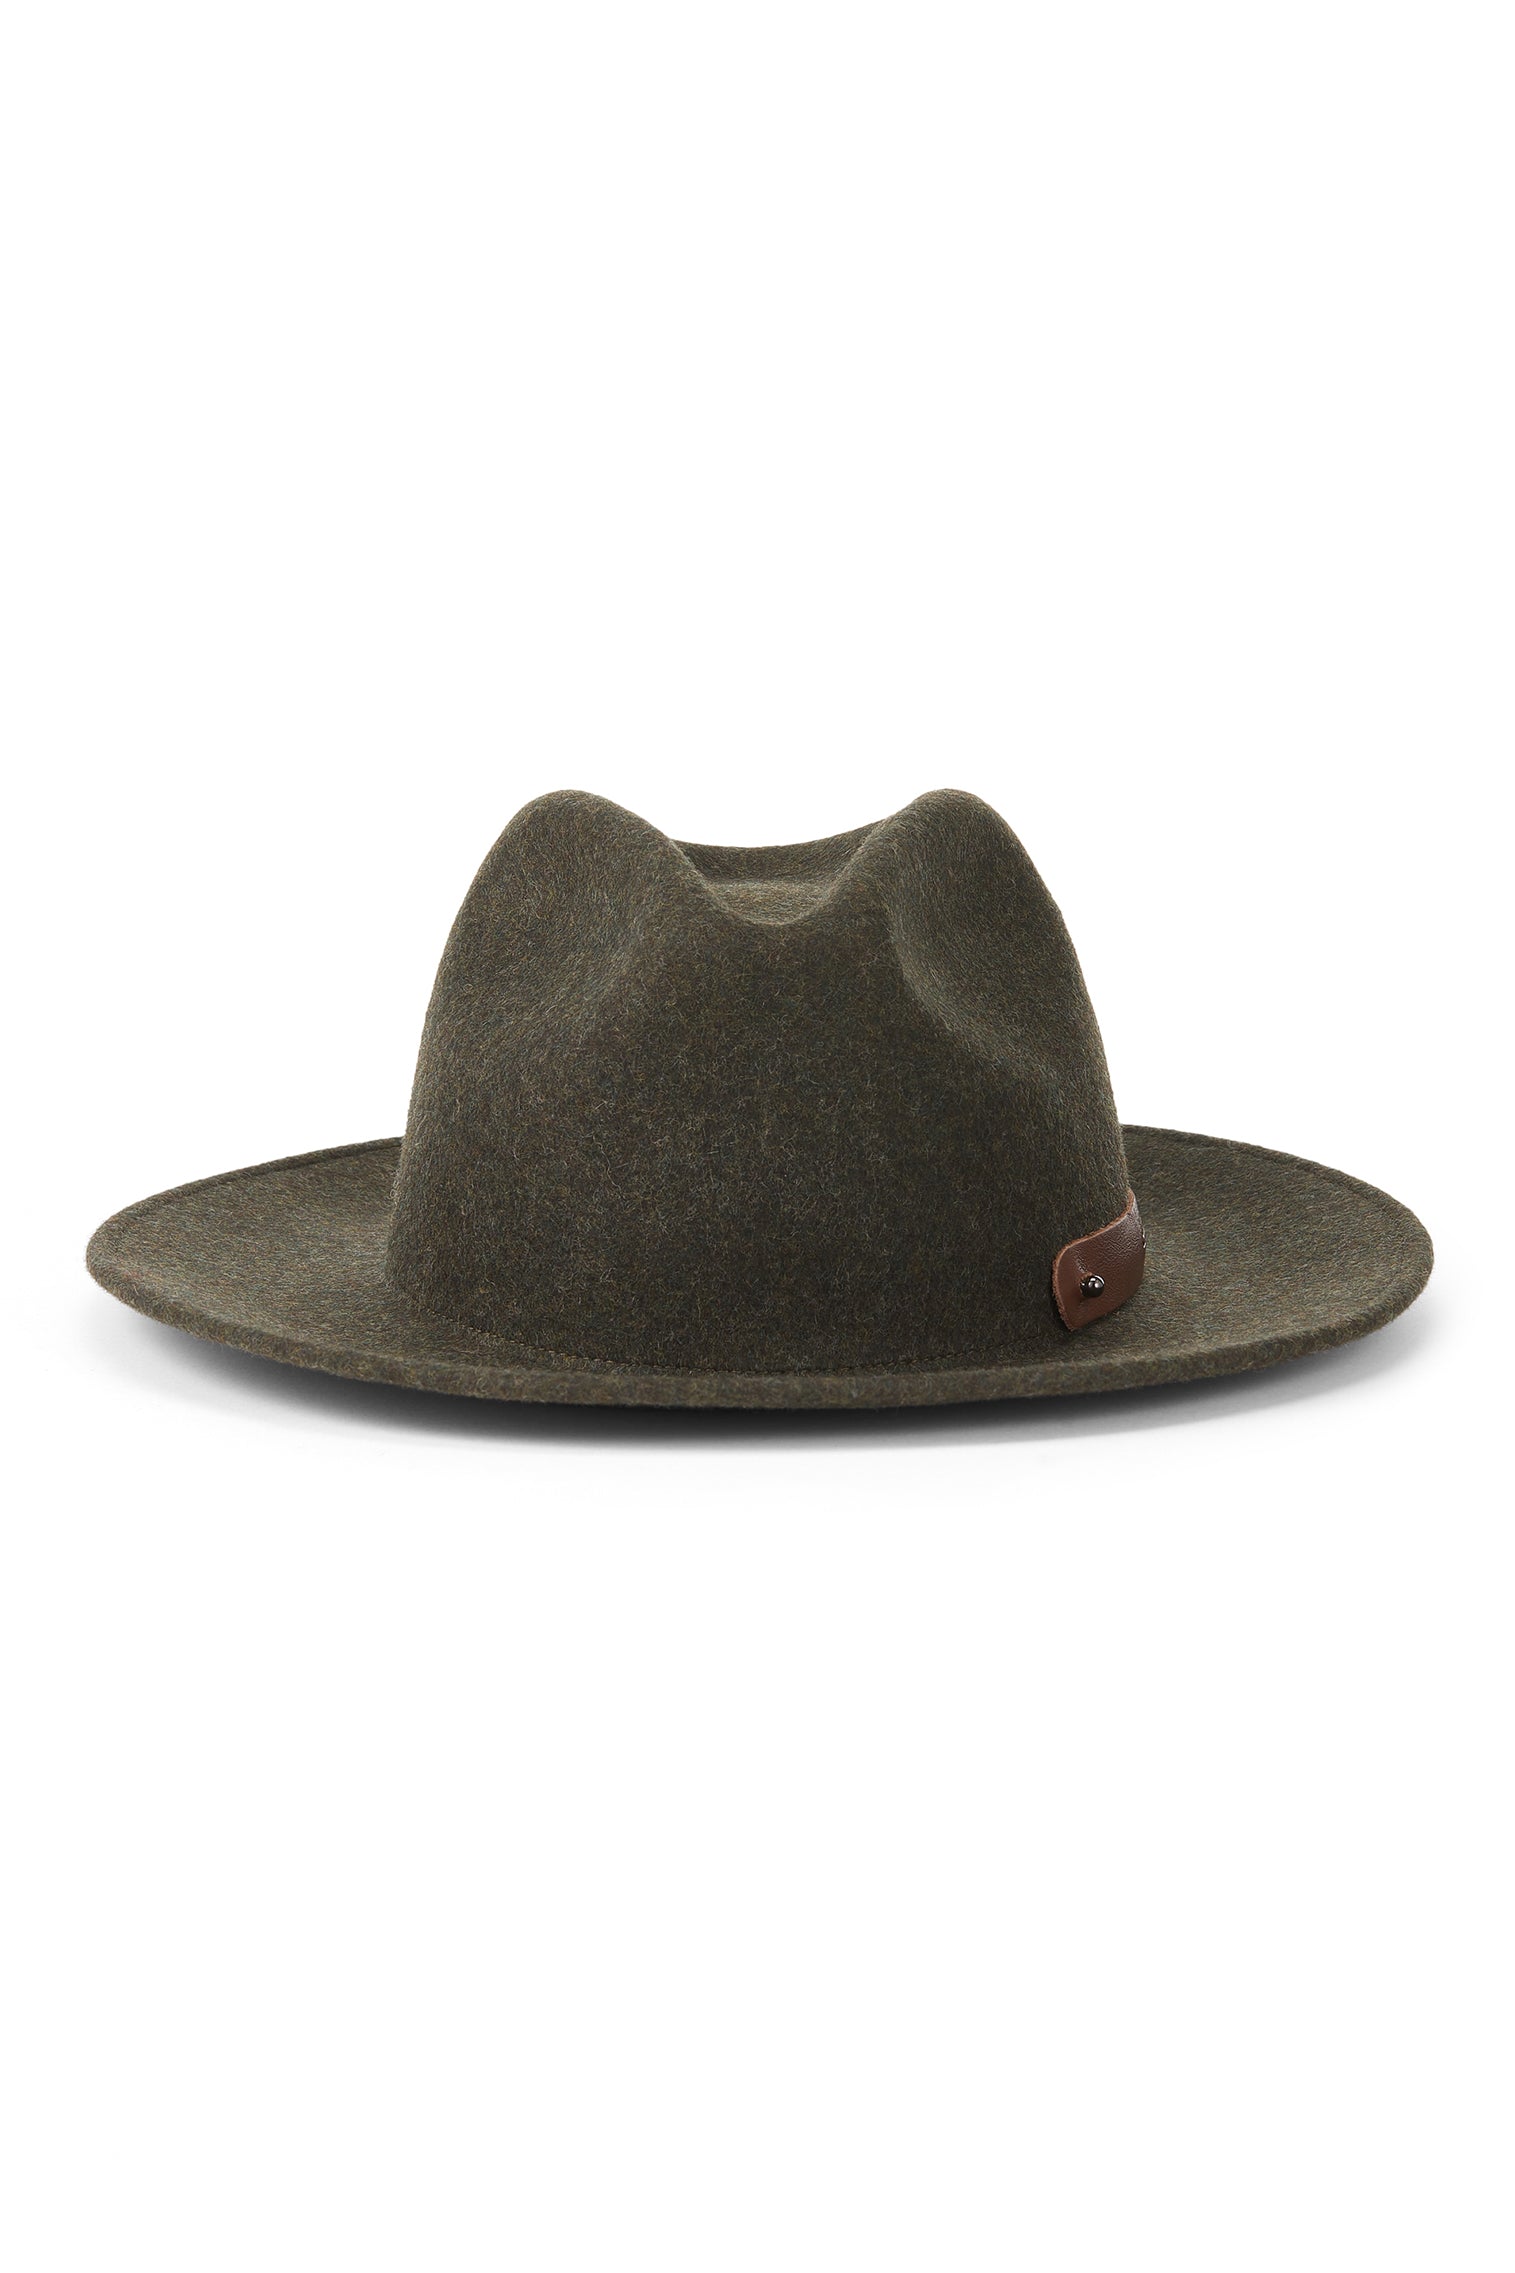 Cheltenham Rollable Trilby - Packable Hats for Travel - Lock & Co. Hatters London UK